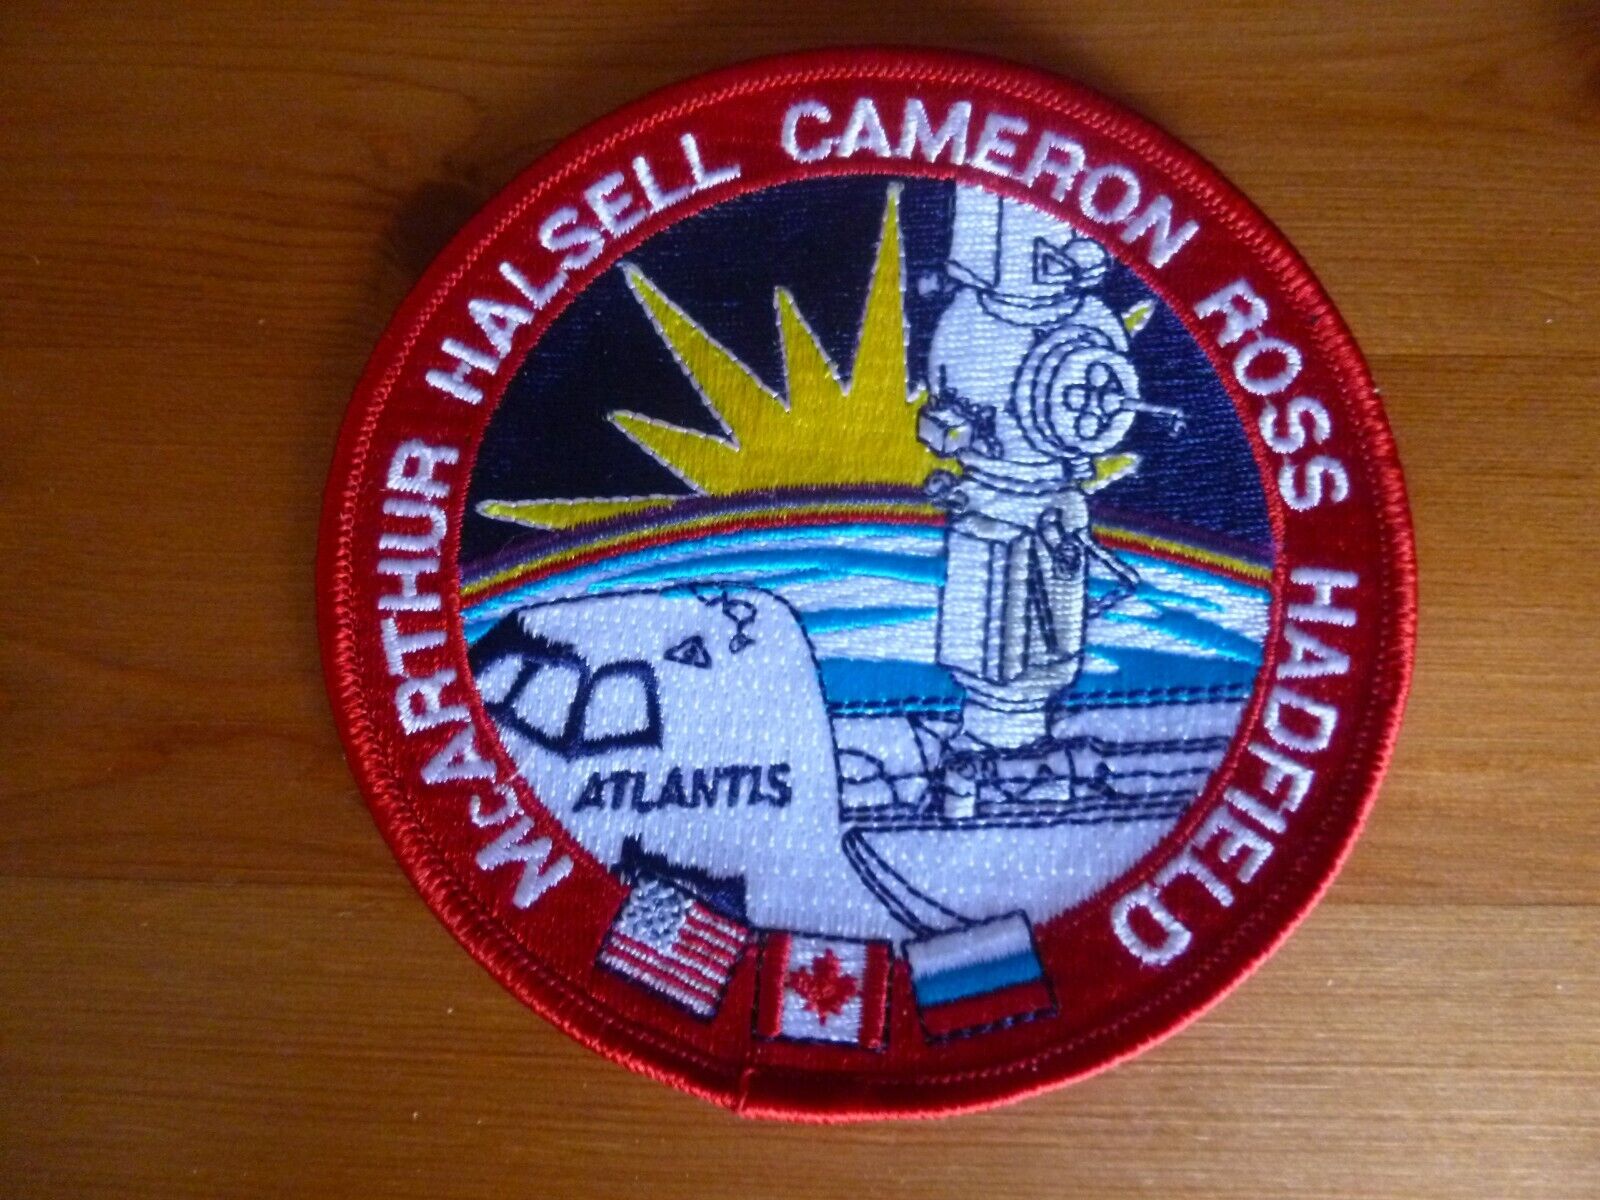 NASA STS-74 ATLANTIS Space Shuttle PATCH 1995 Mission Kennedy Space Center USA